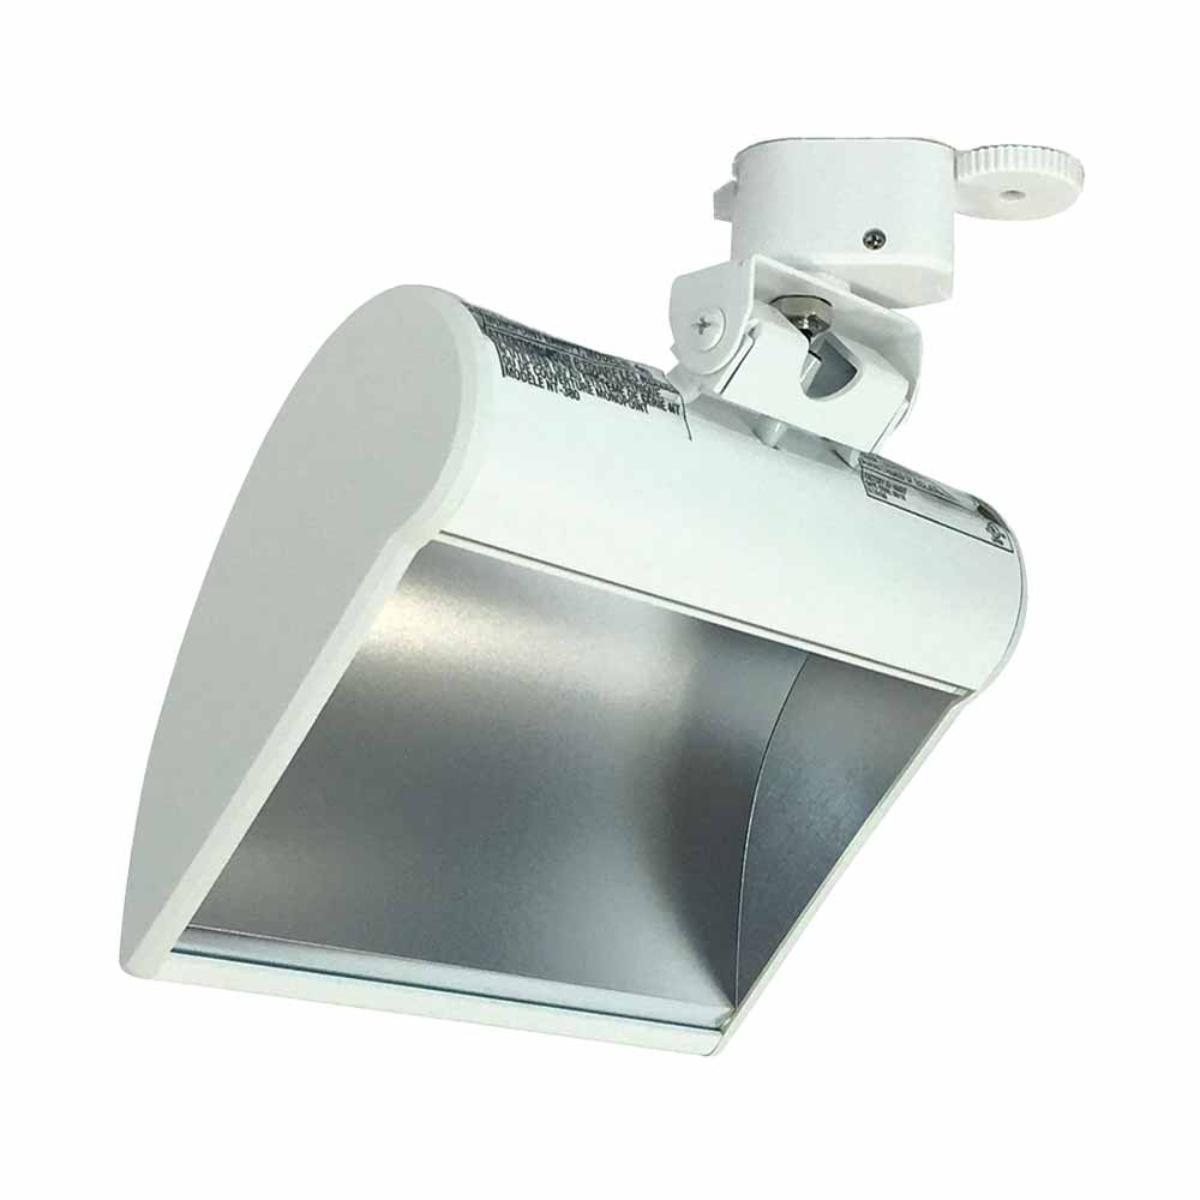 Dipper LED Wall Wash Track 15W 1000 Lumens Halo (H) - Bees Lighting